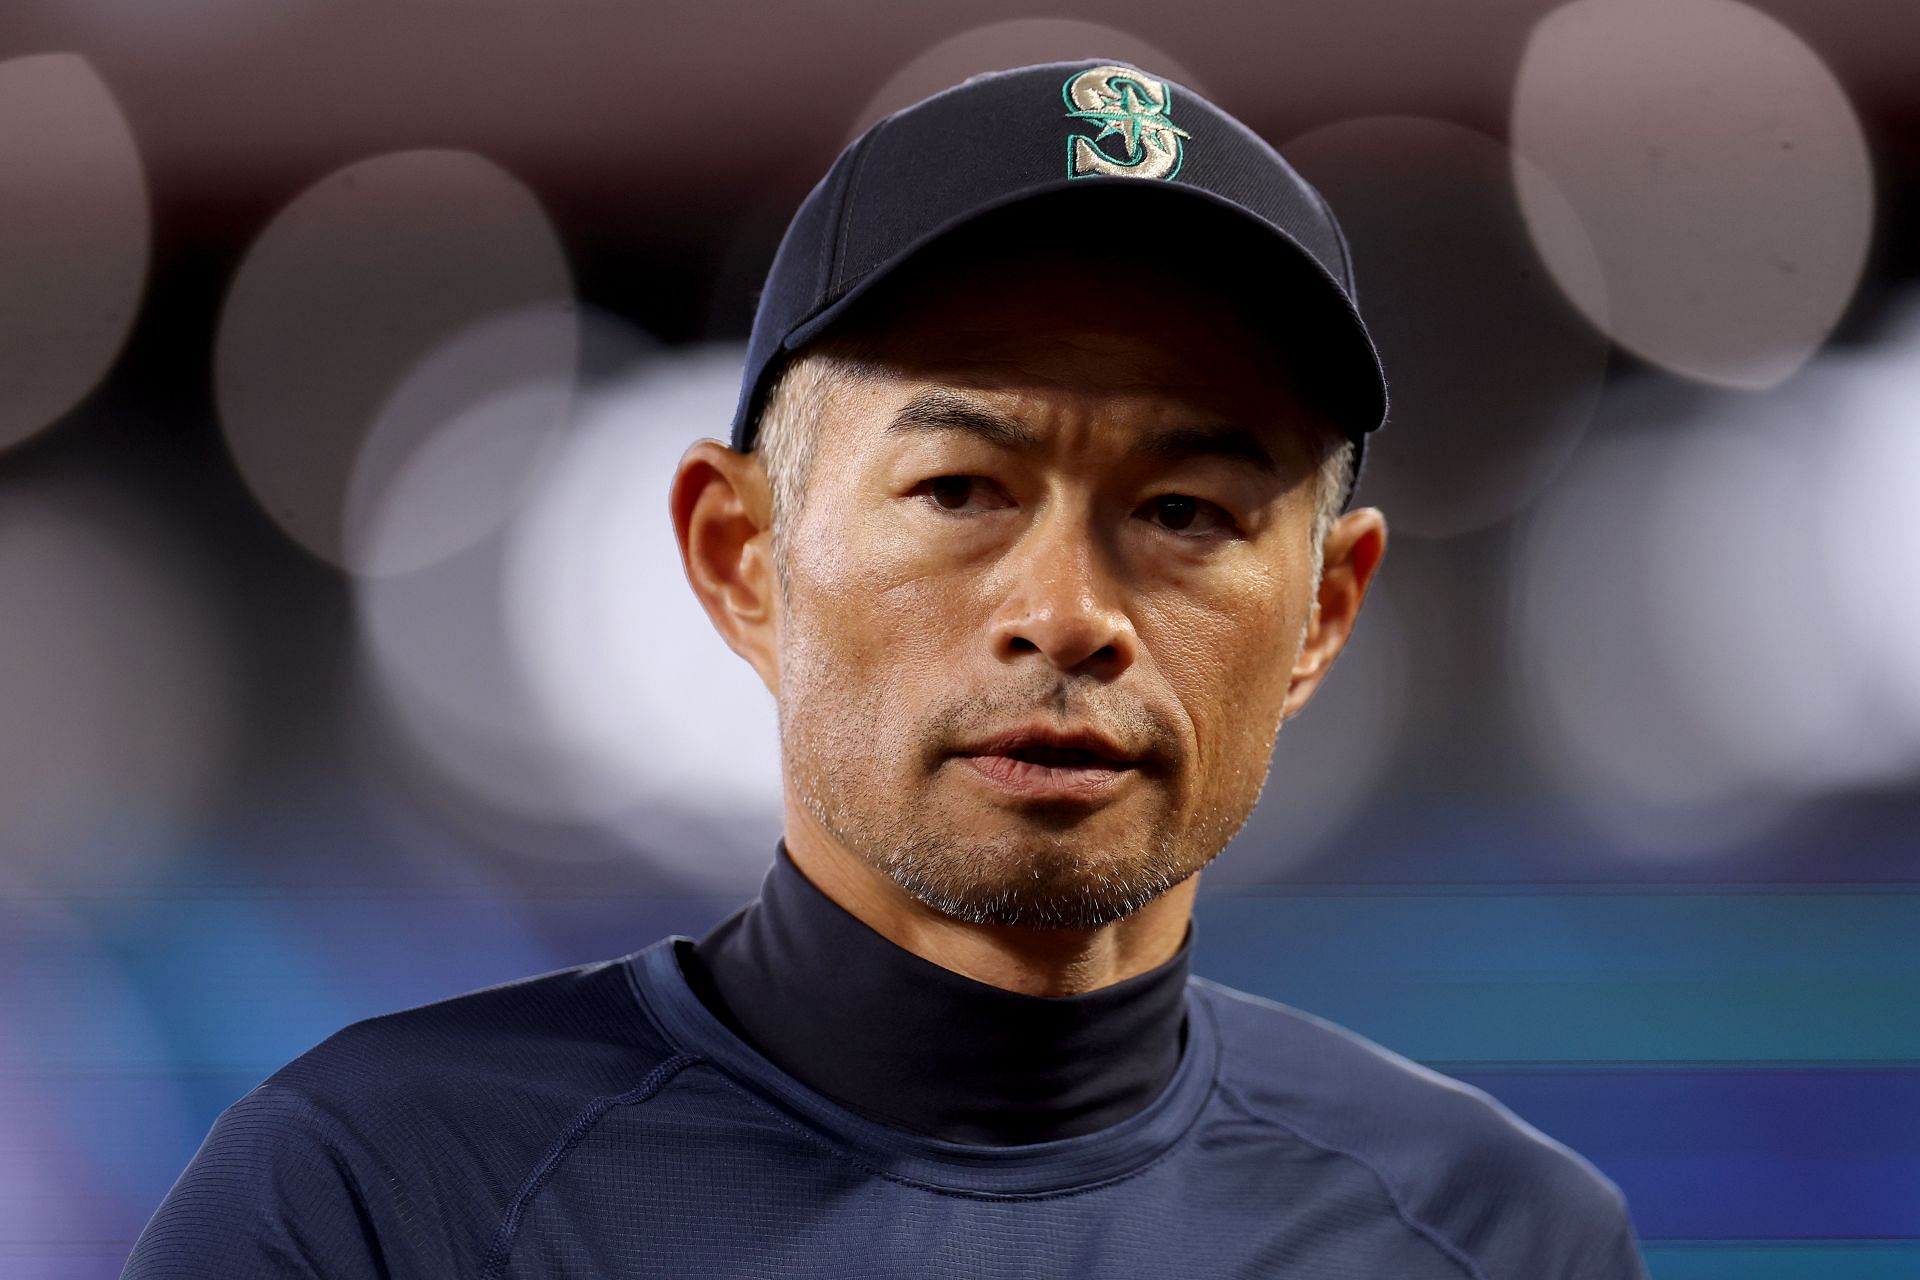 Ichiro Suzuki once patched things up with his wife after a sex scandal with a Japanese housewife